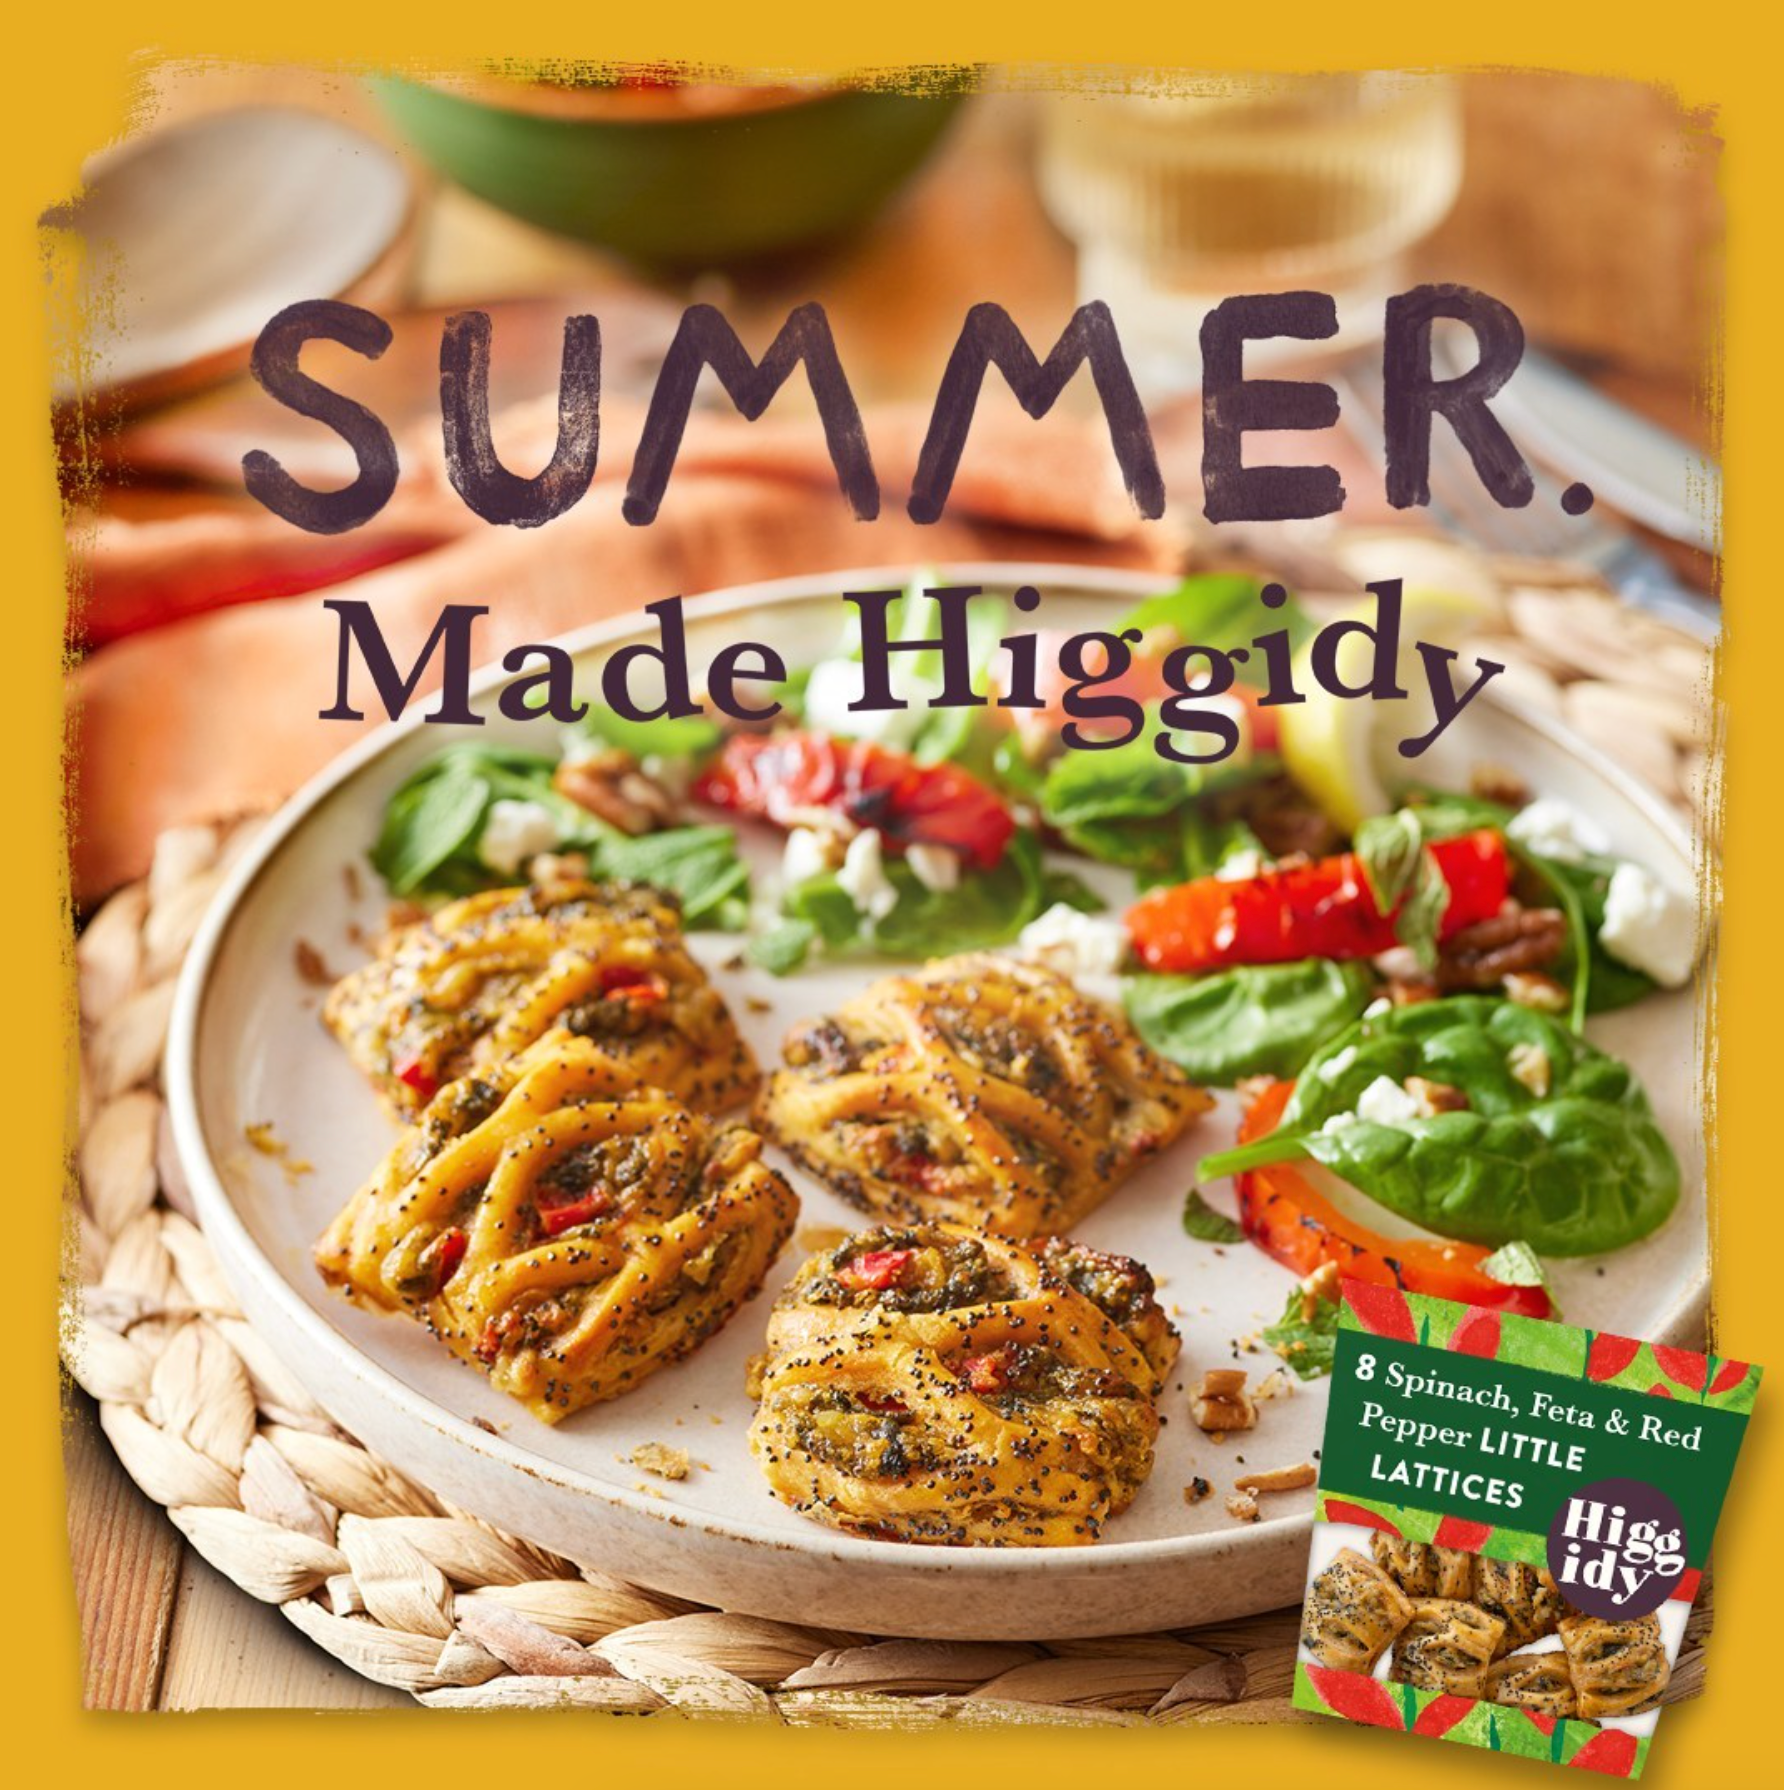 A plate of food with the words summer made higgidy on it